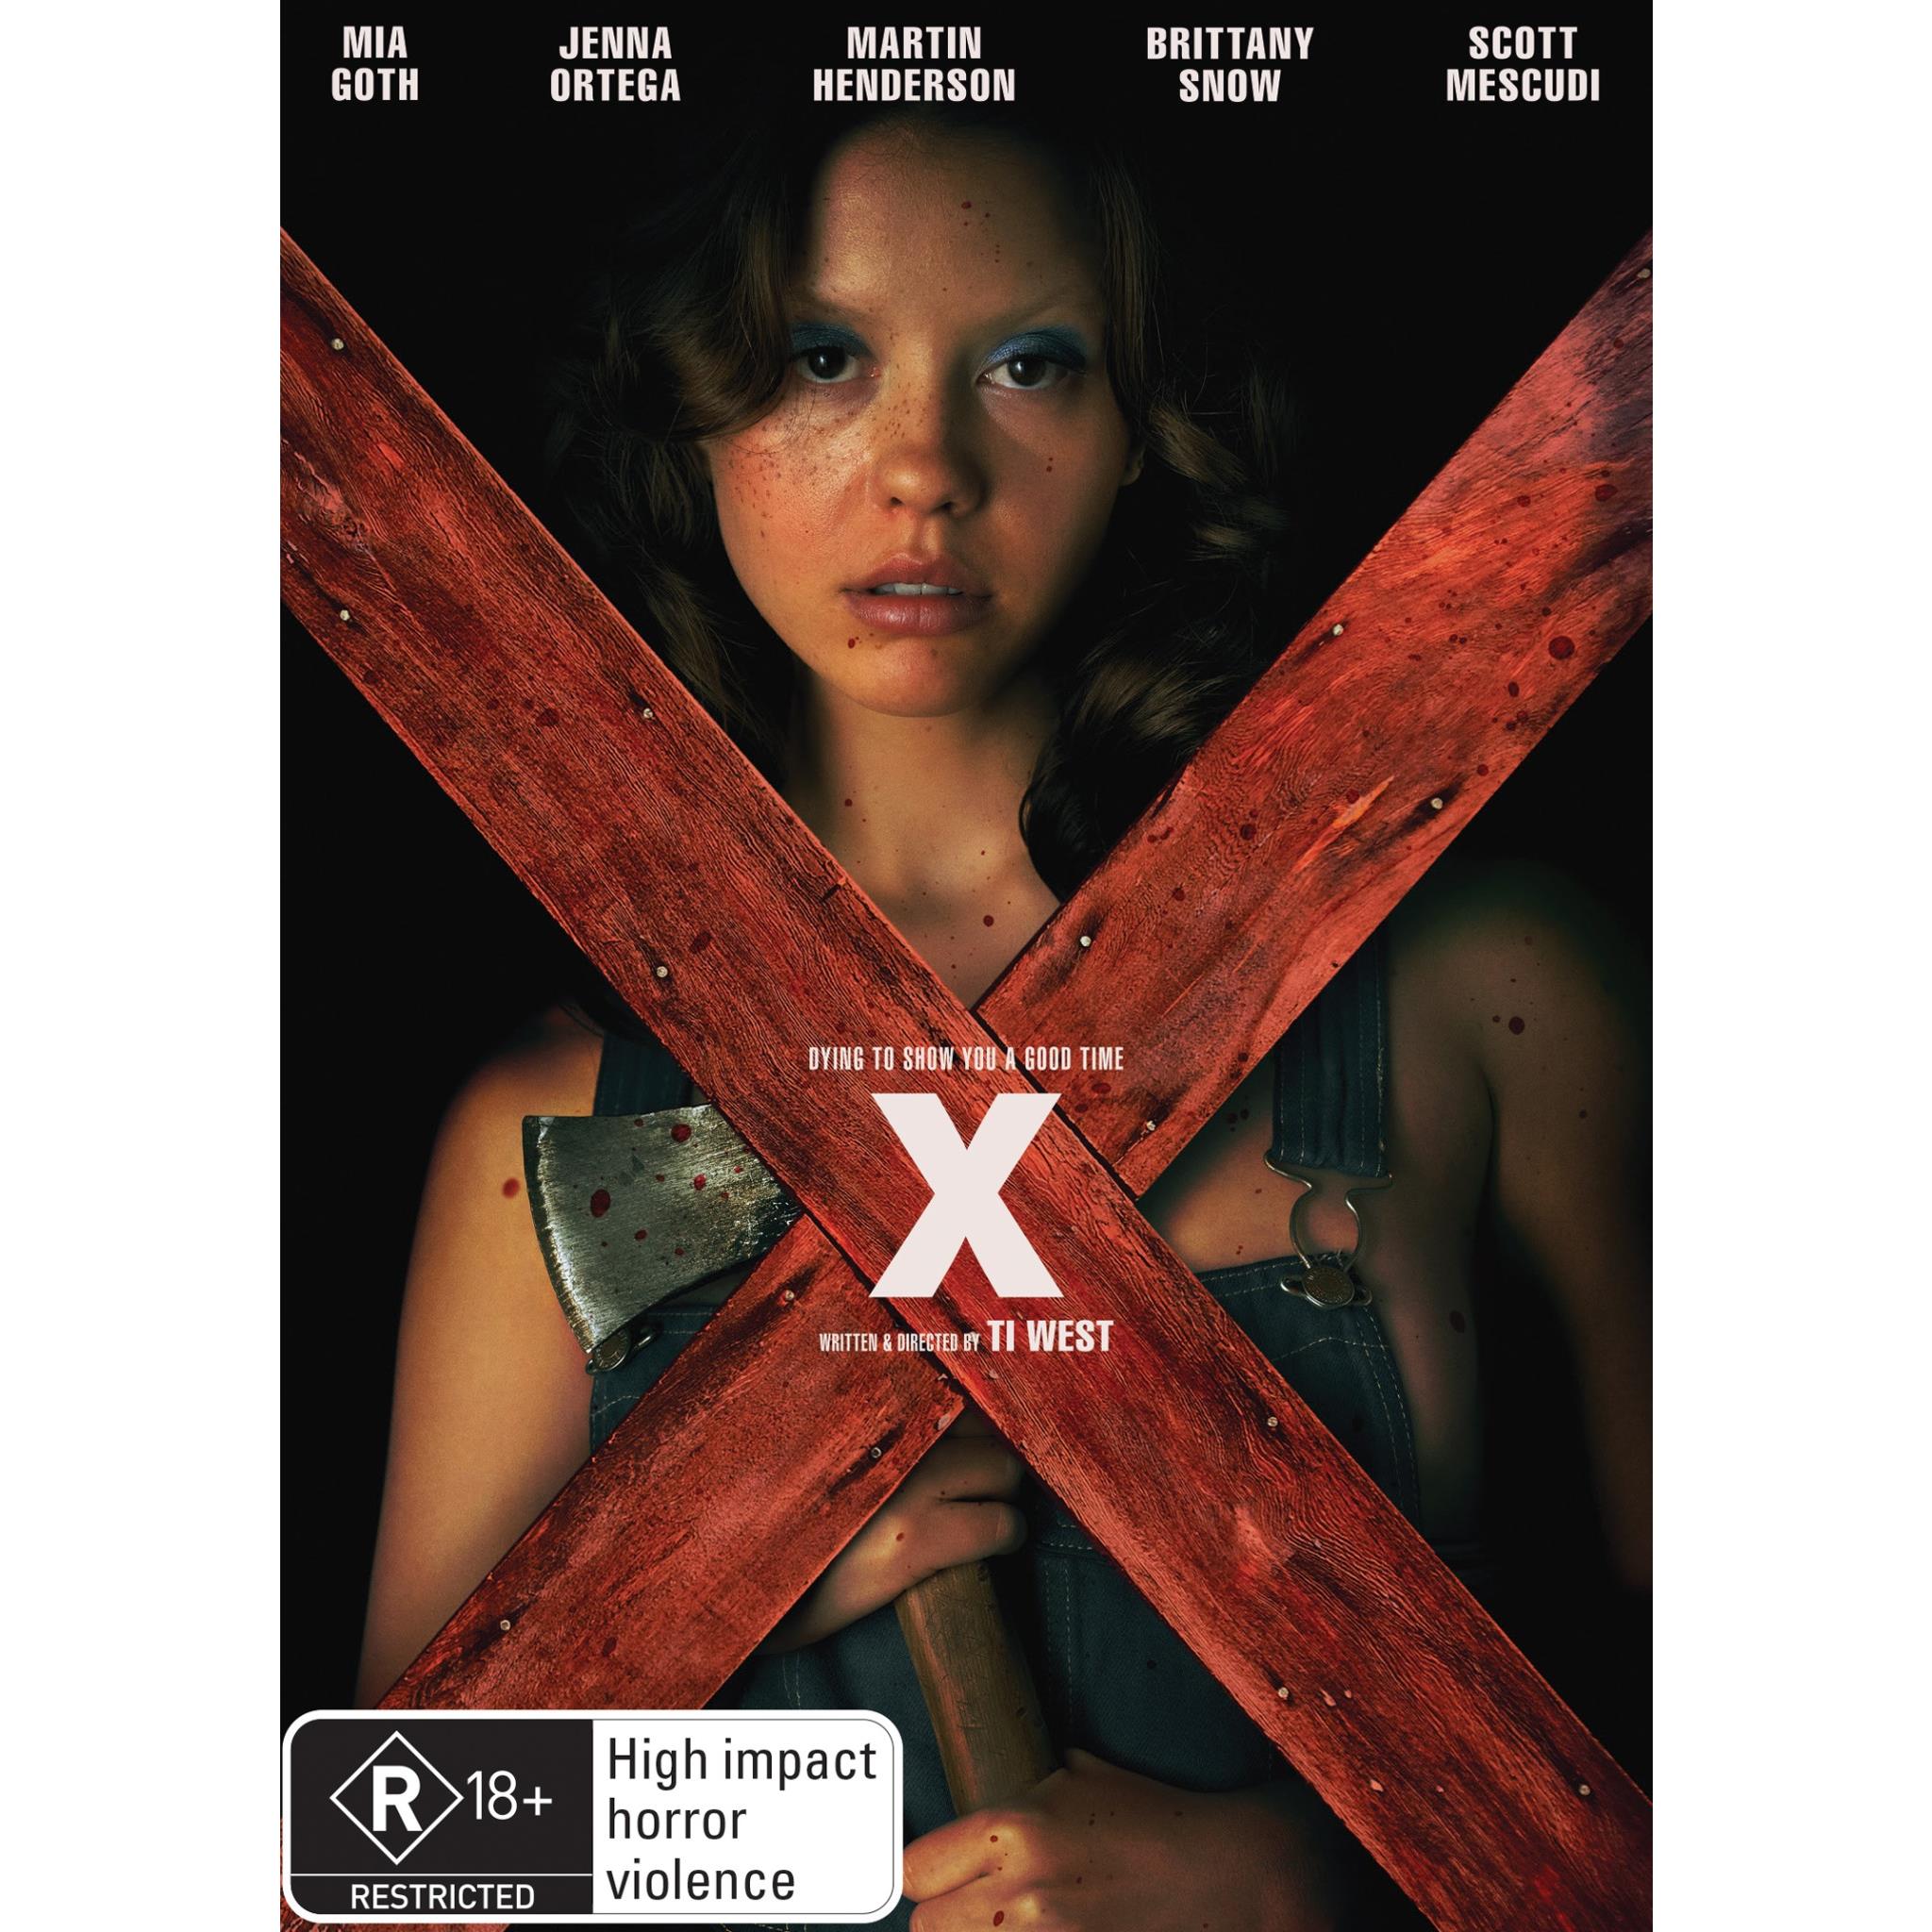 xxx rated r movies